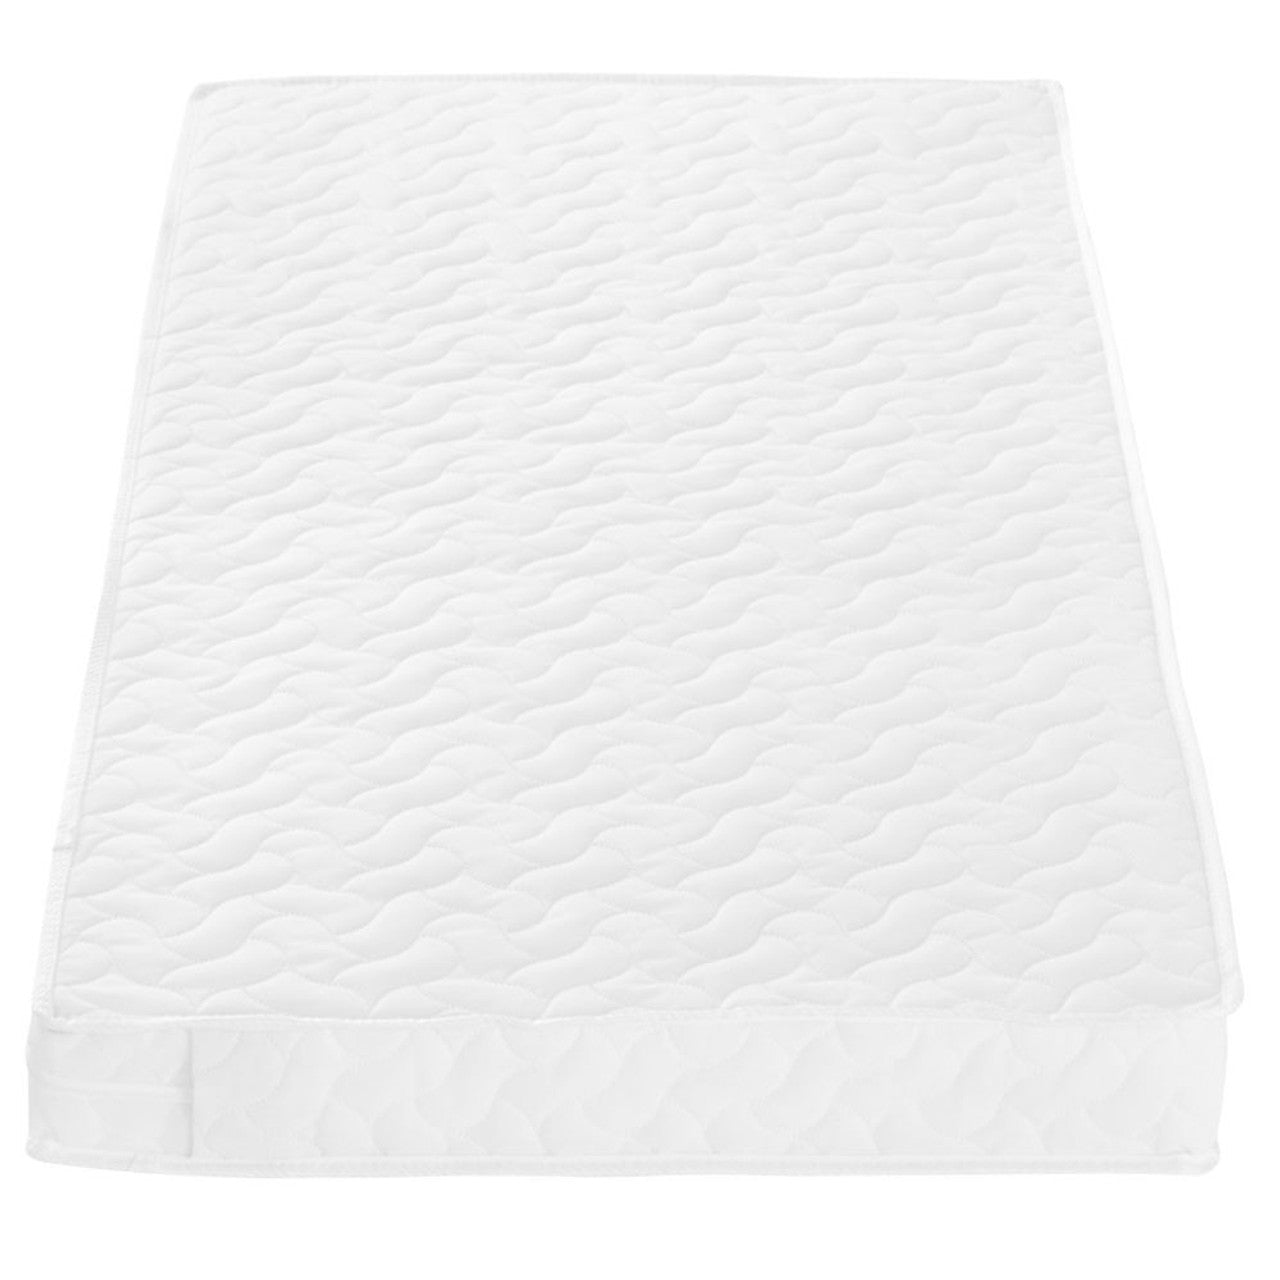 Tutti Bambini Pocket Sprung Cot Bed Mattress (70 x 140 cm) -  | For Your Little One